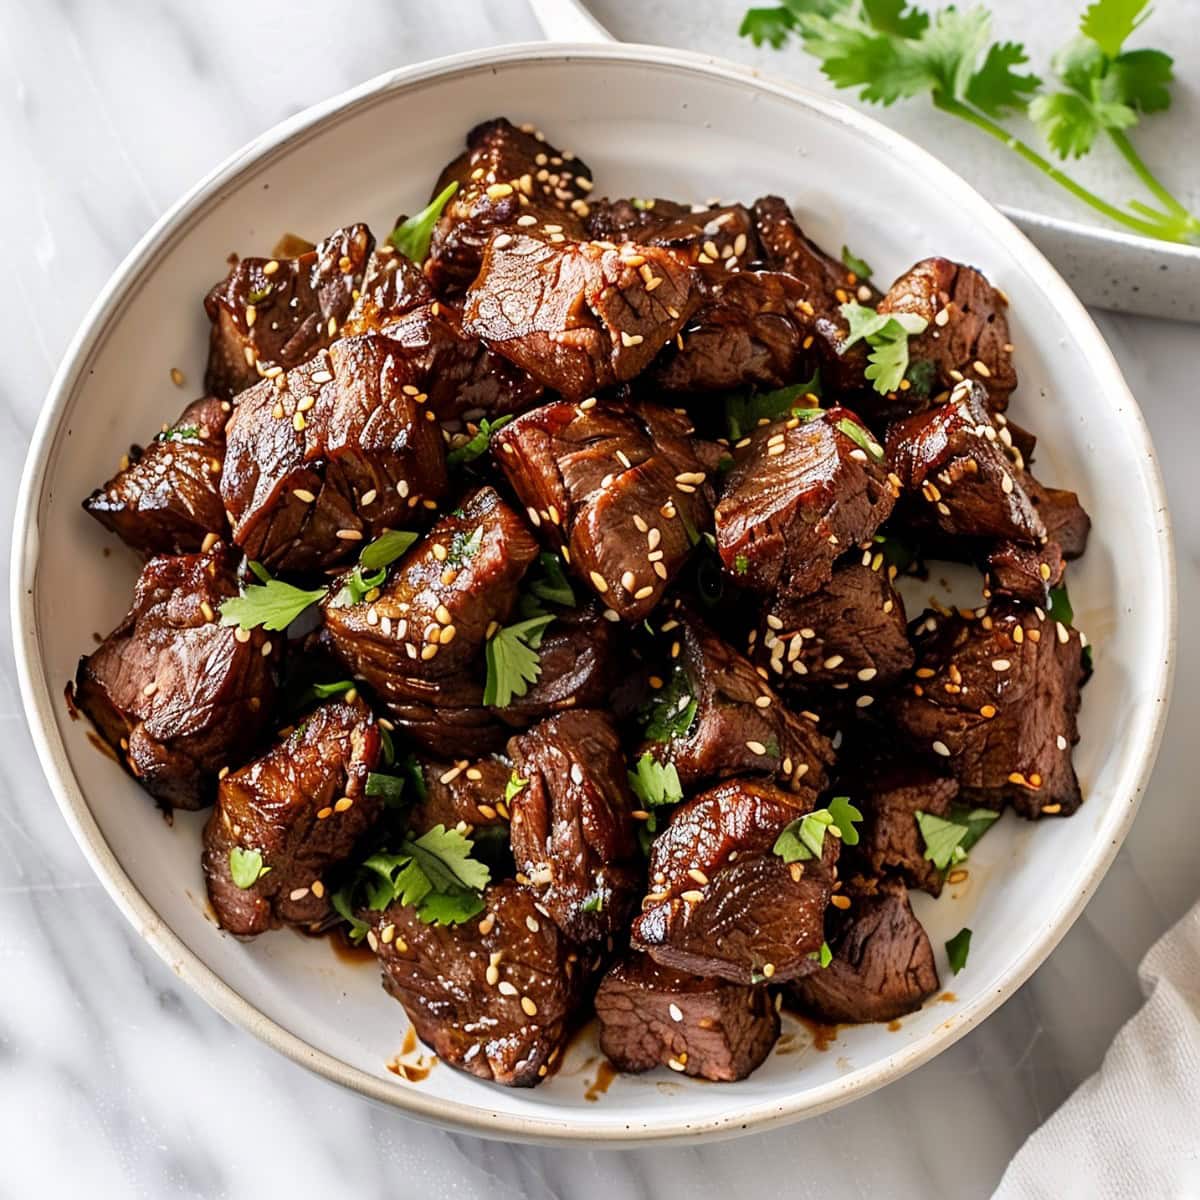 Asian steak bites marinated with sweet and savory sauce, garnished with green cilantro and toasted sesame seeds